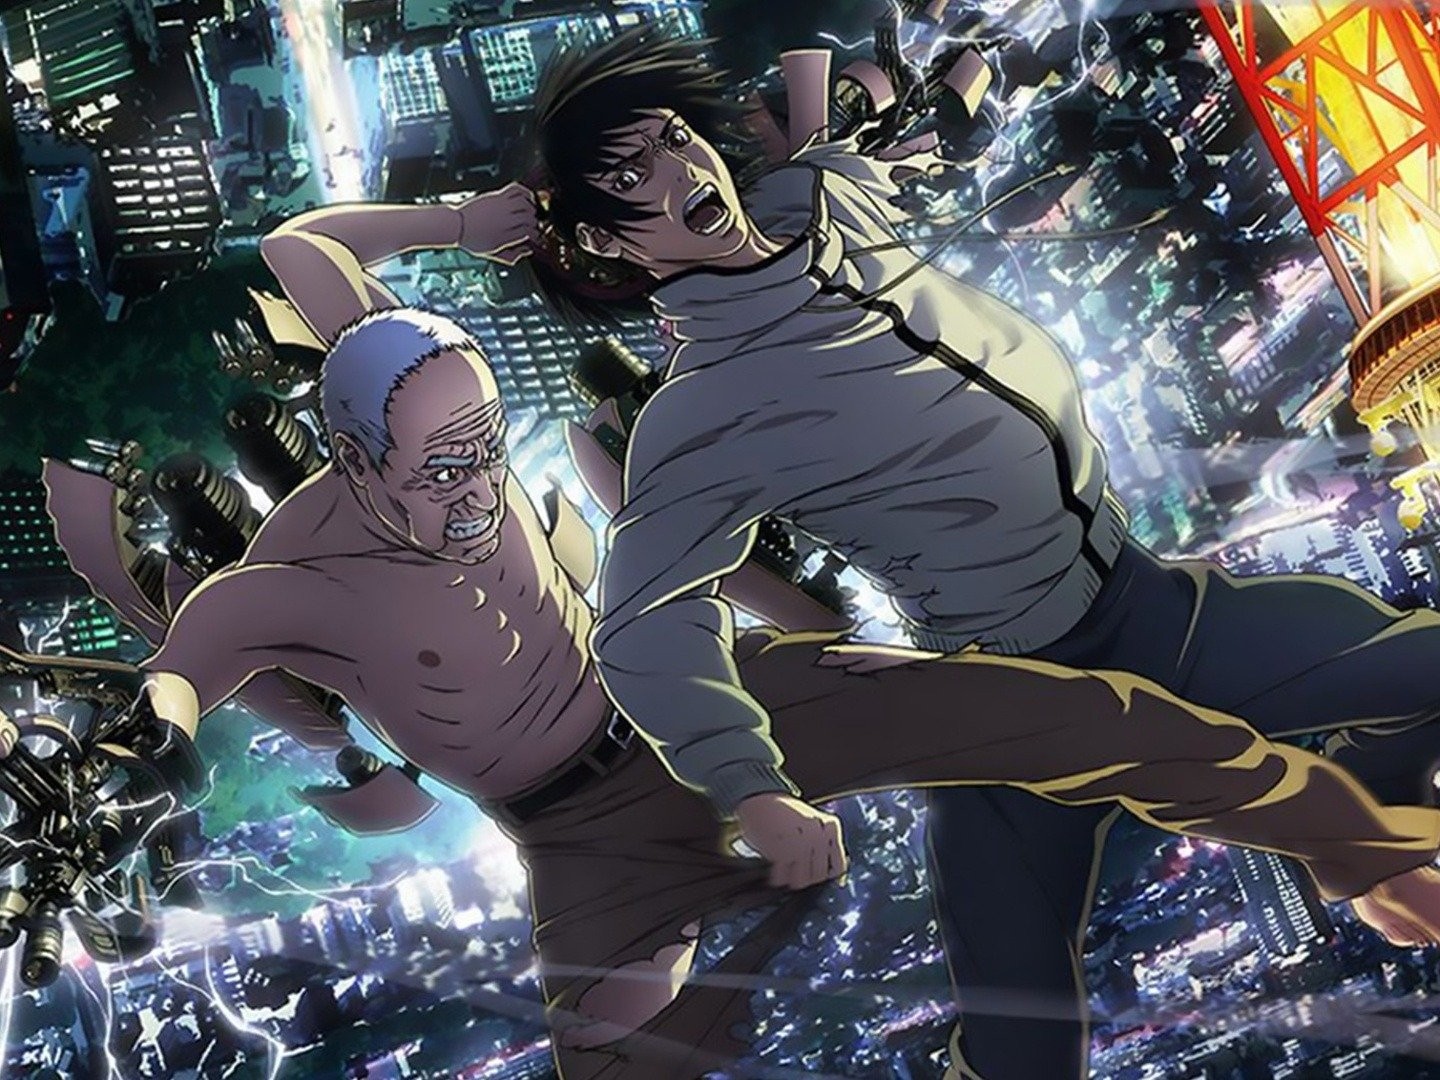 Inuyashiki Last Hero' review: The most-watch superhero series for